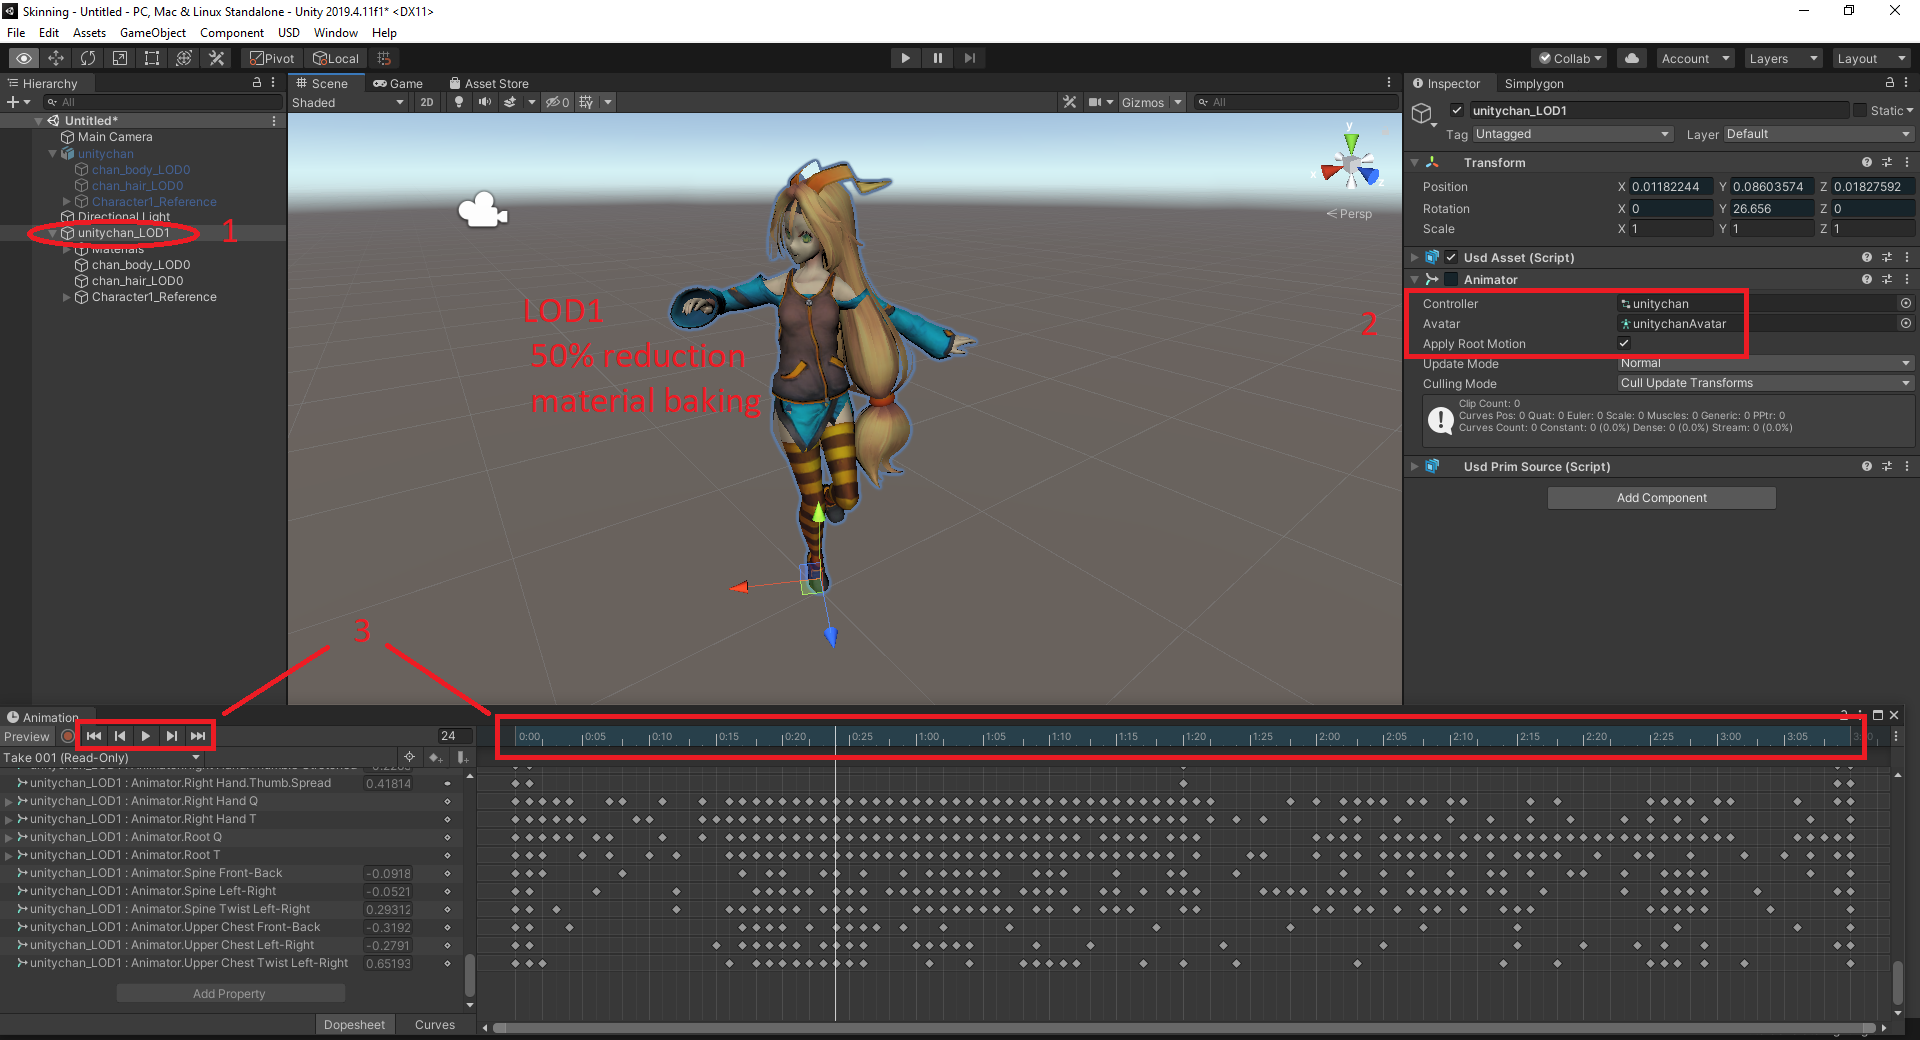 Apply controller and avatar to optimized asset